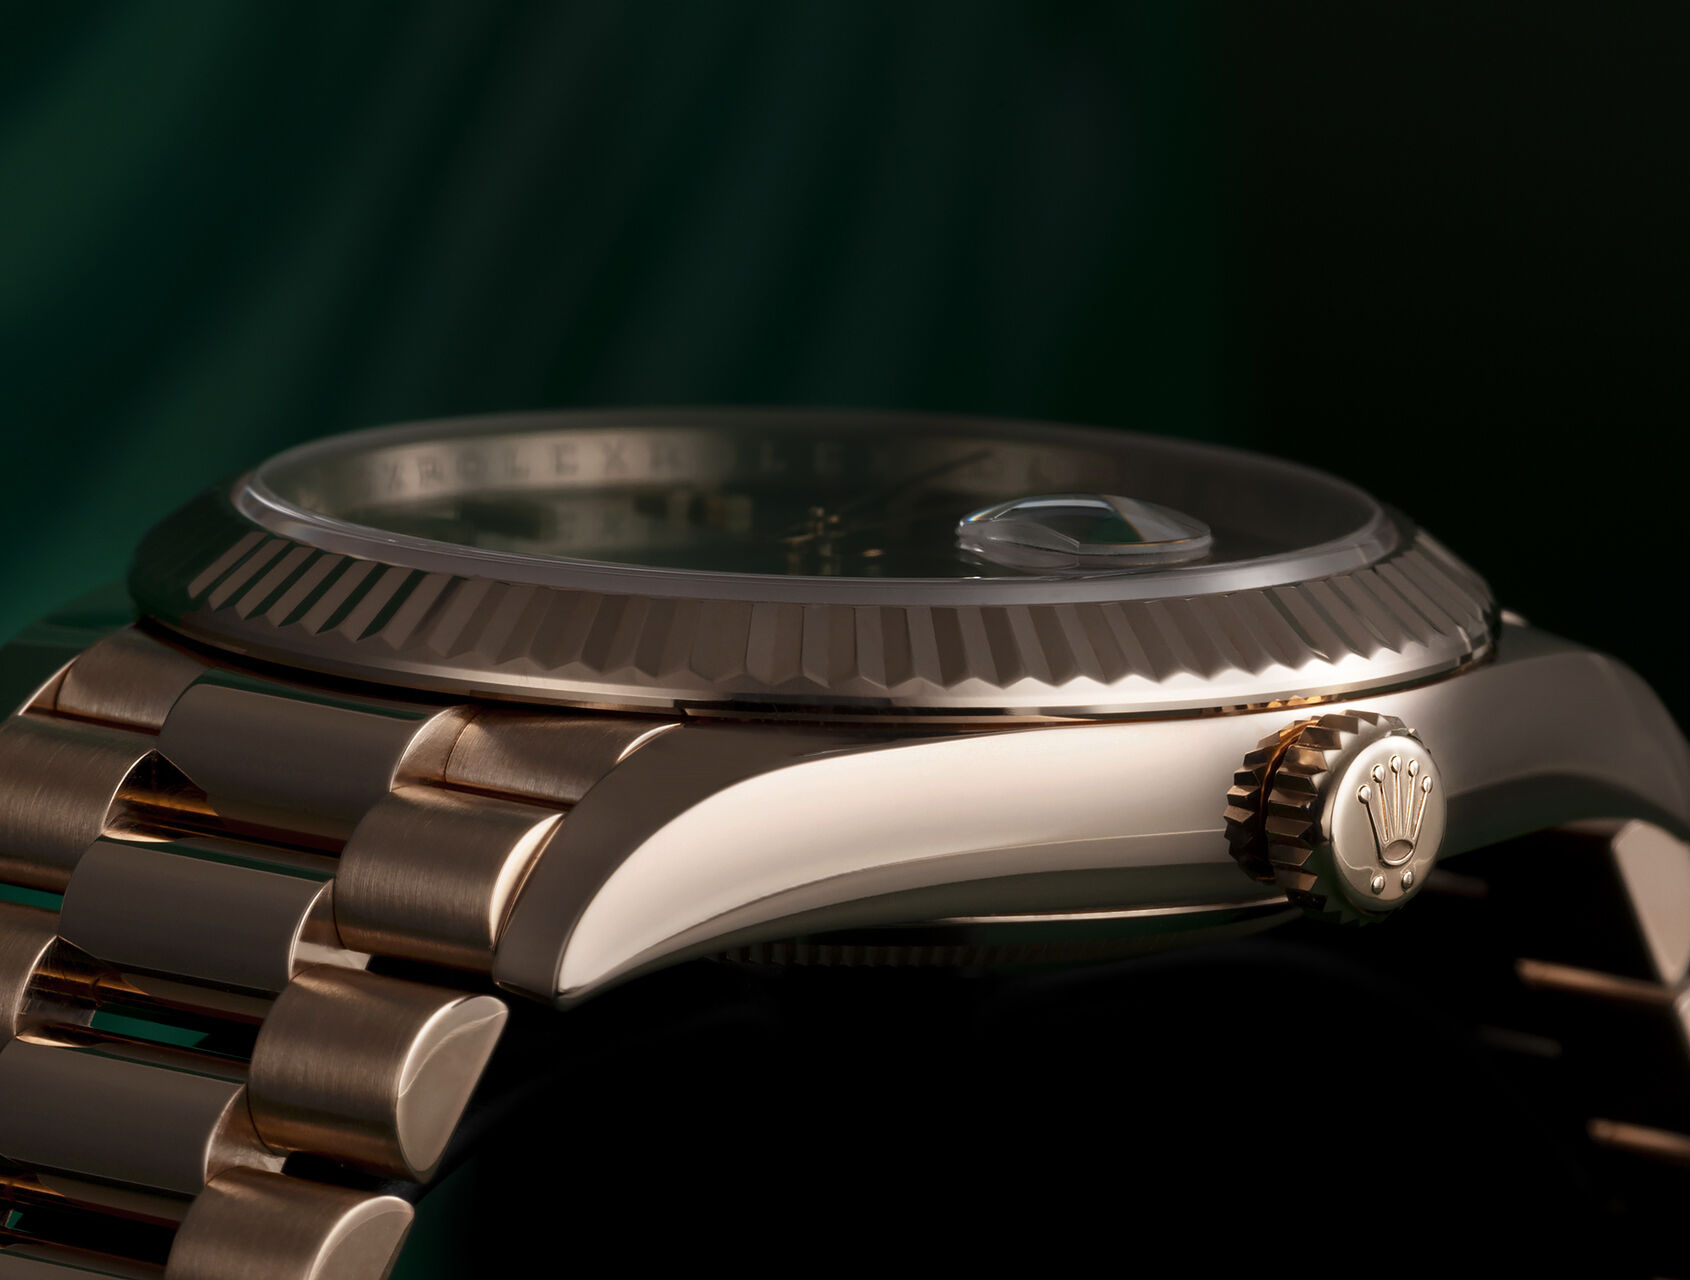 ref 228235 | 228235 - Chocolate Dial | Rolex Day-Date